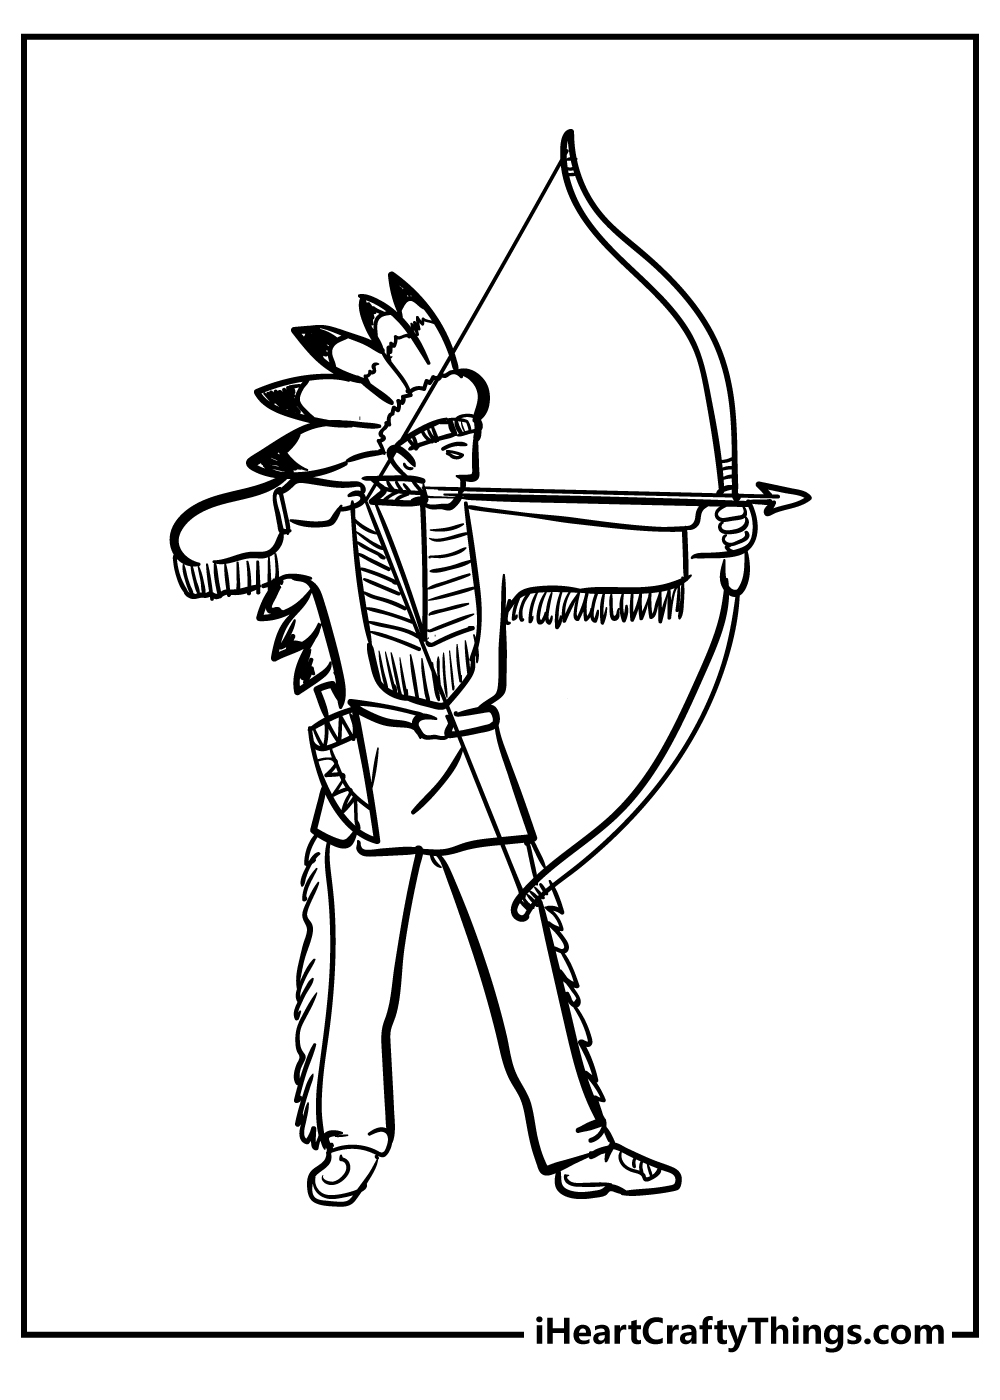 Native American Coloring Book for adults free download